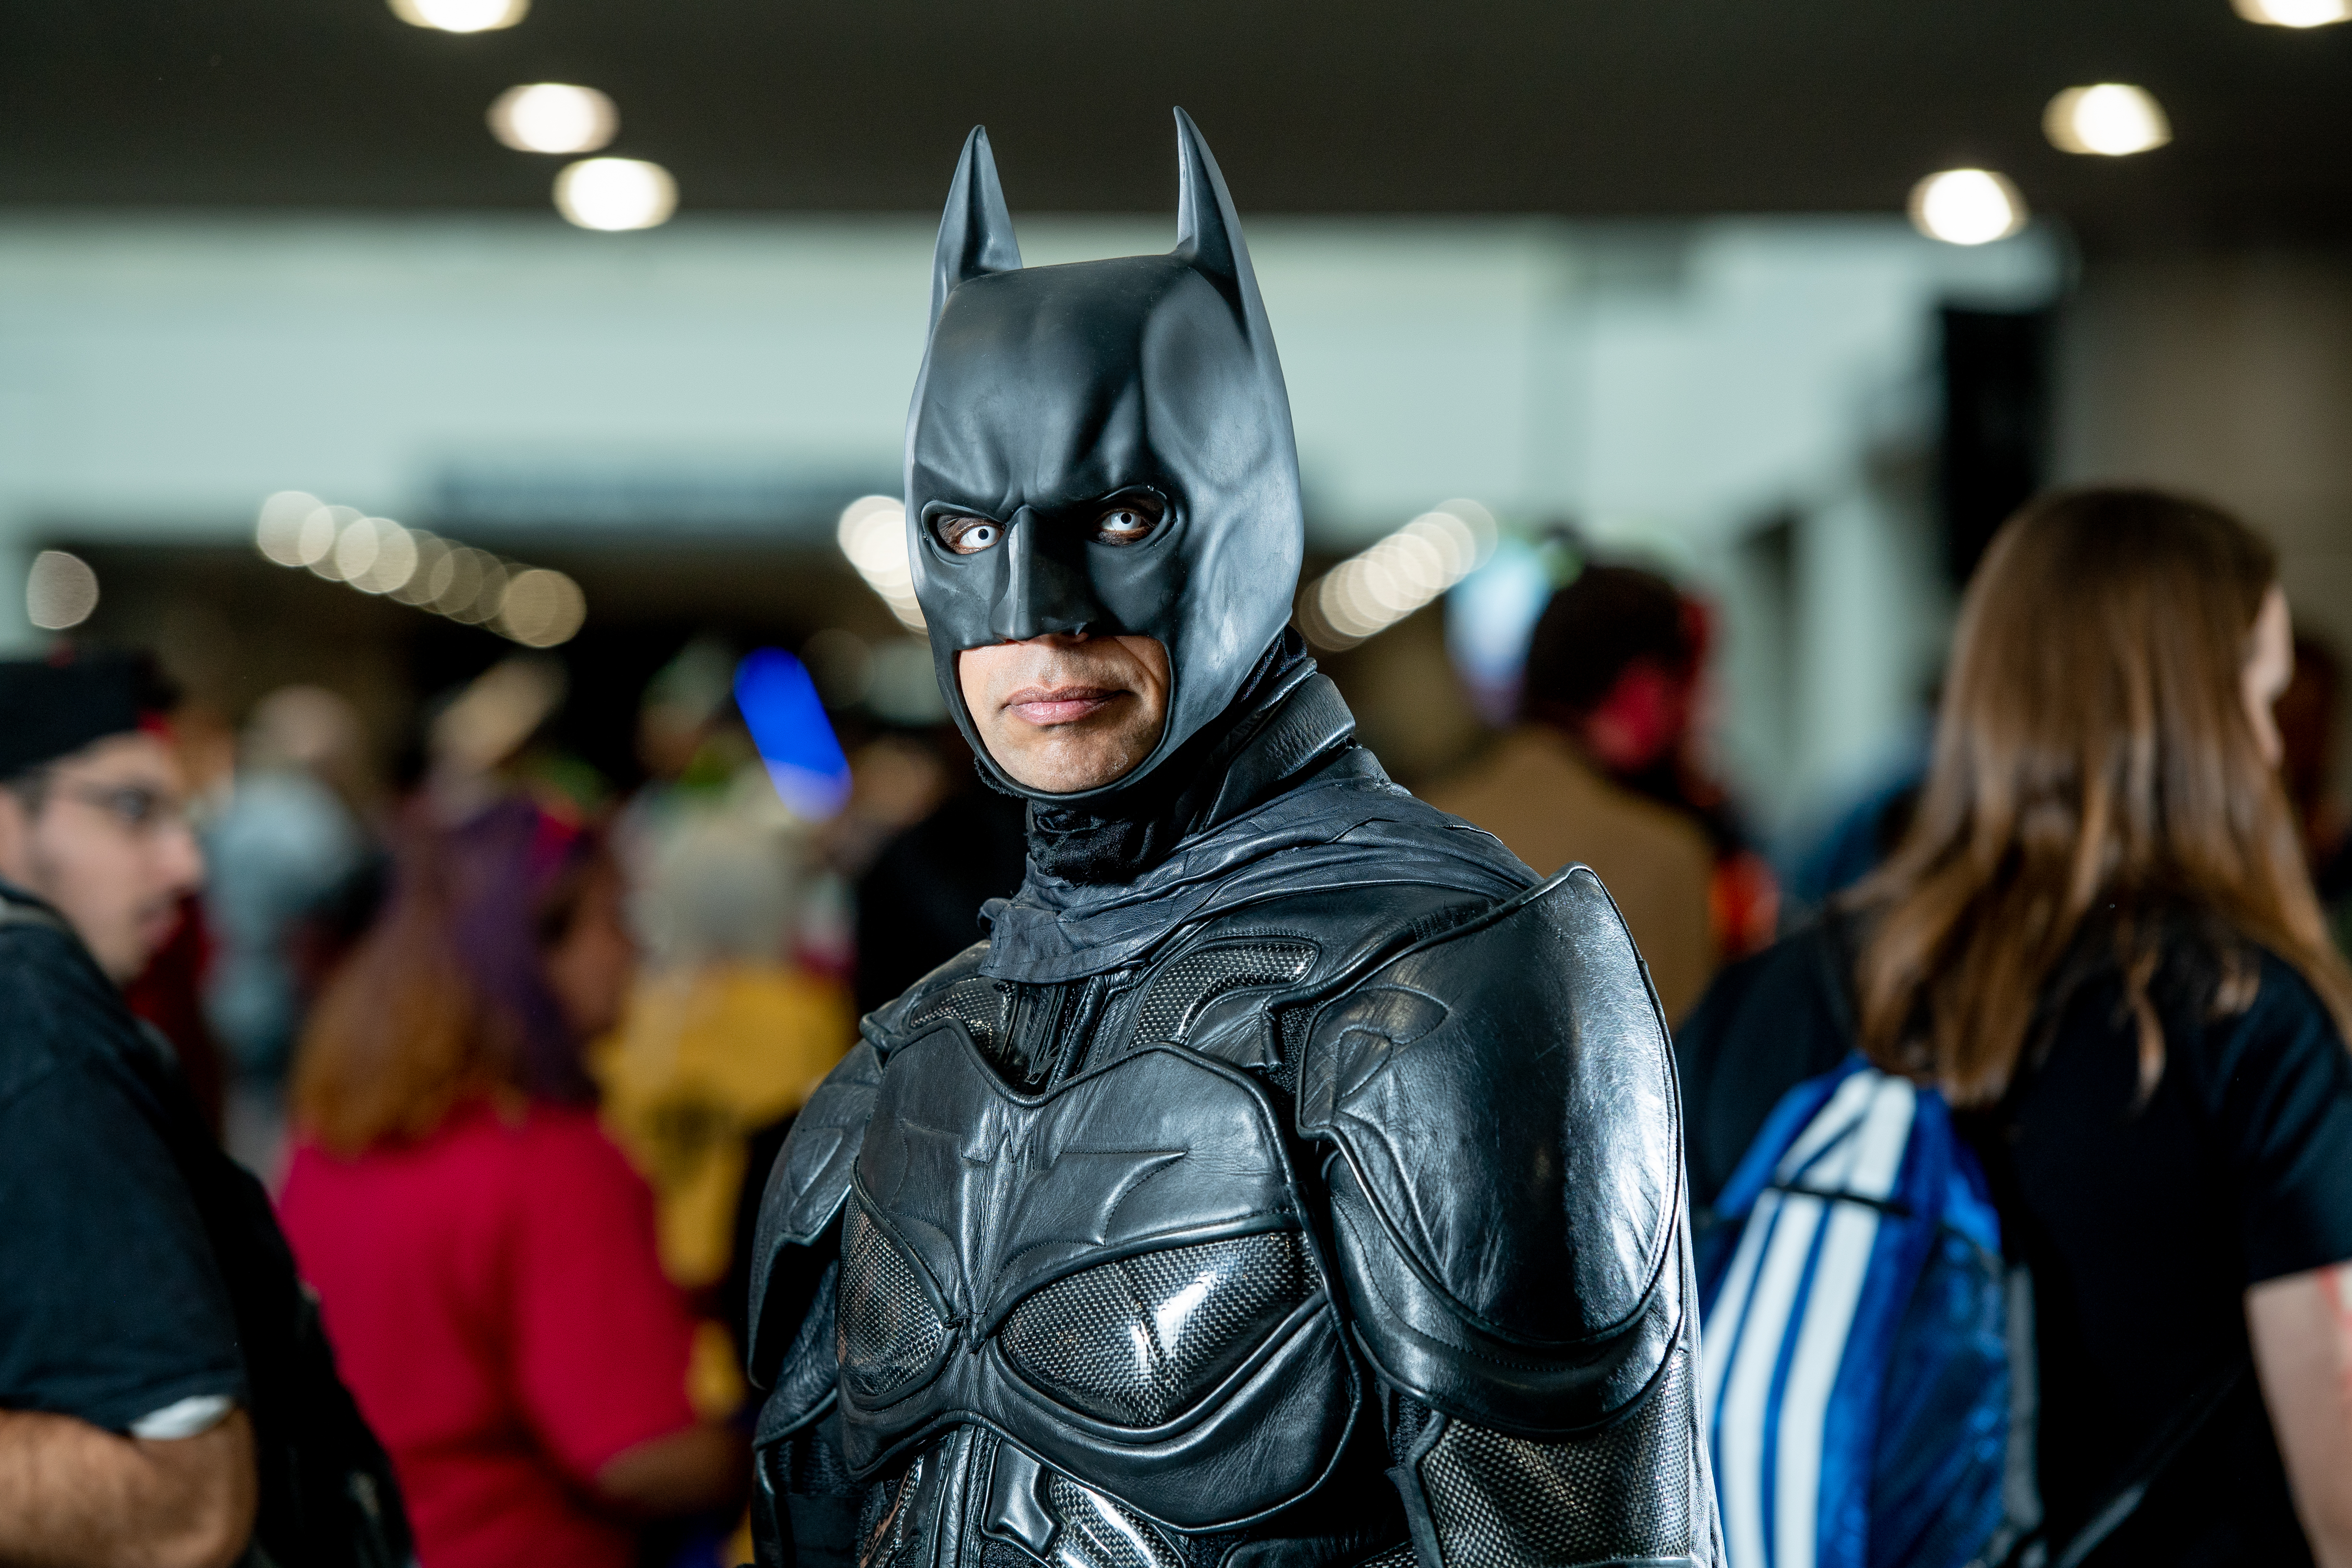 A fan cosplays as Batman from the DC Universe during the 2018 New York Comic Con at Javits Center on October 6, 2018 in New York City.